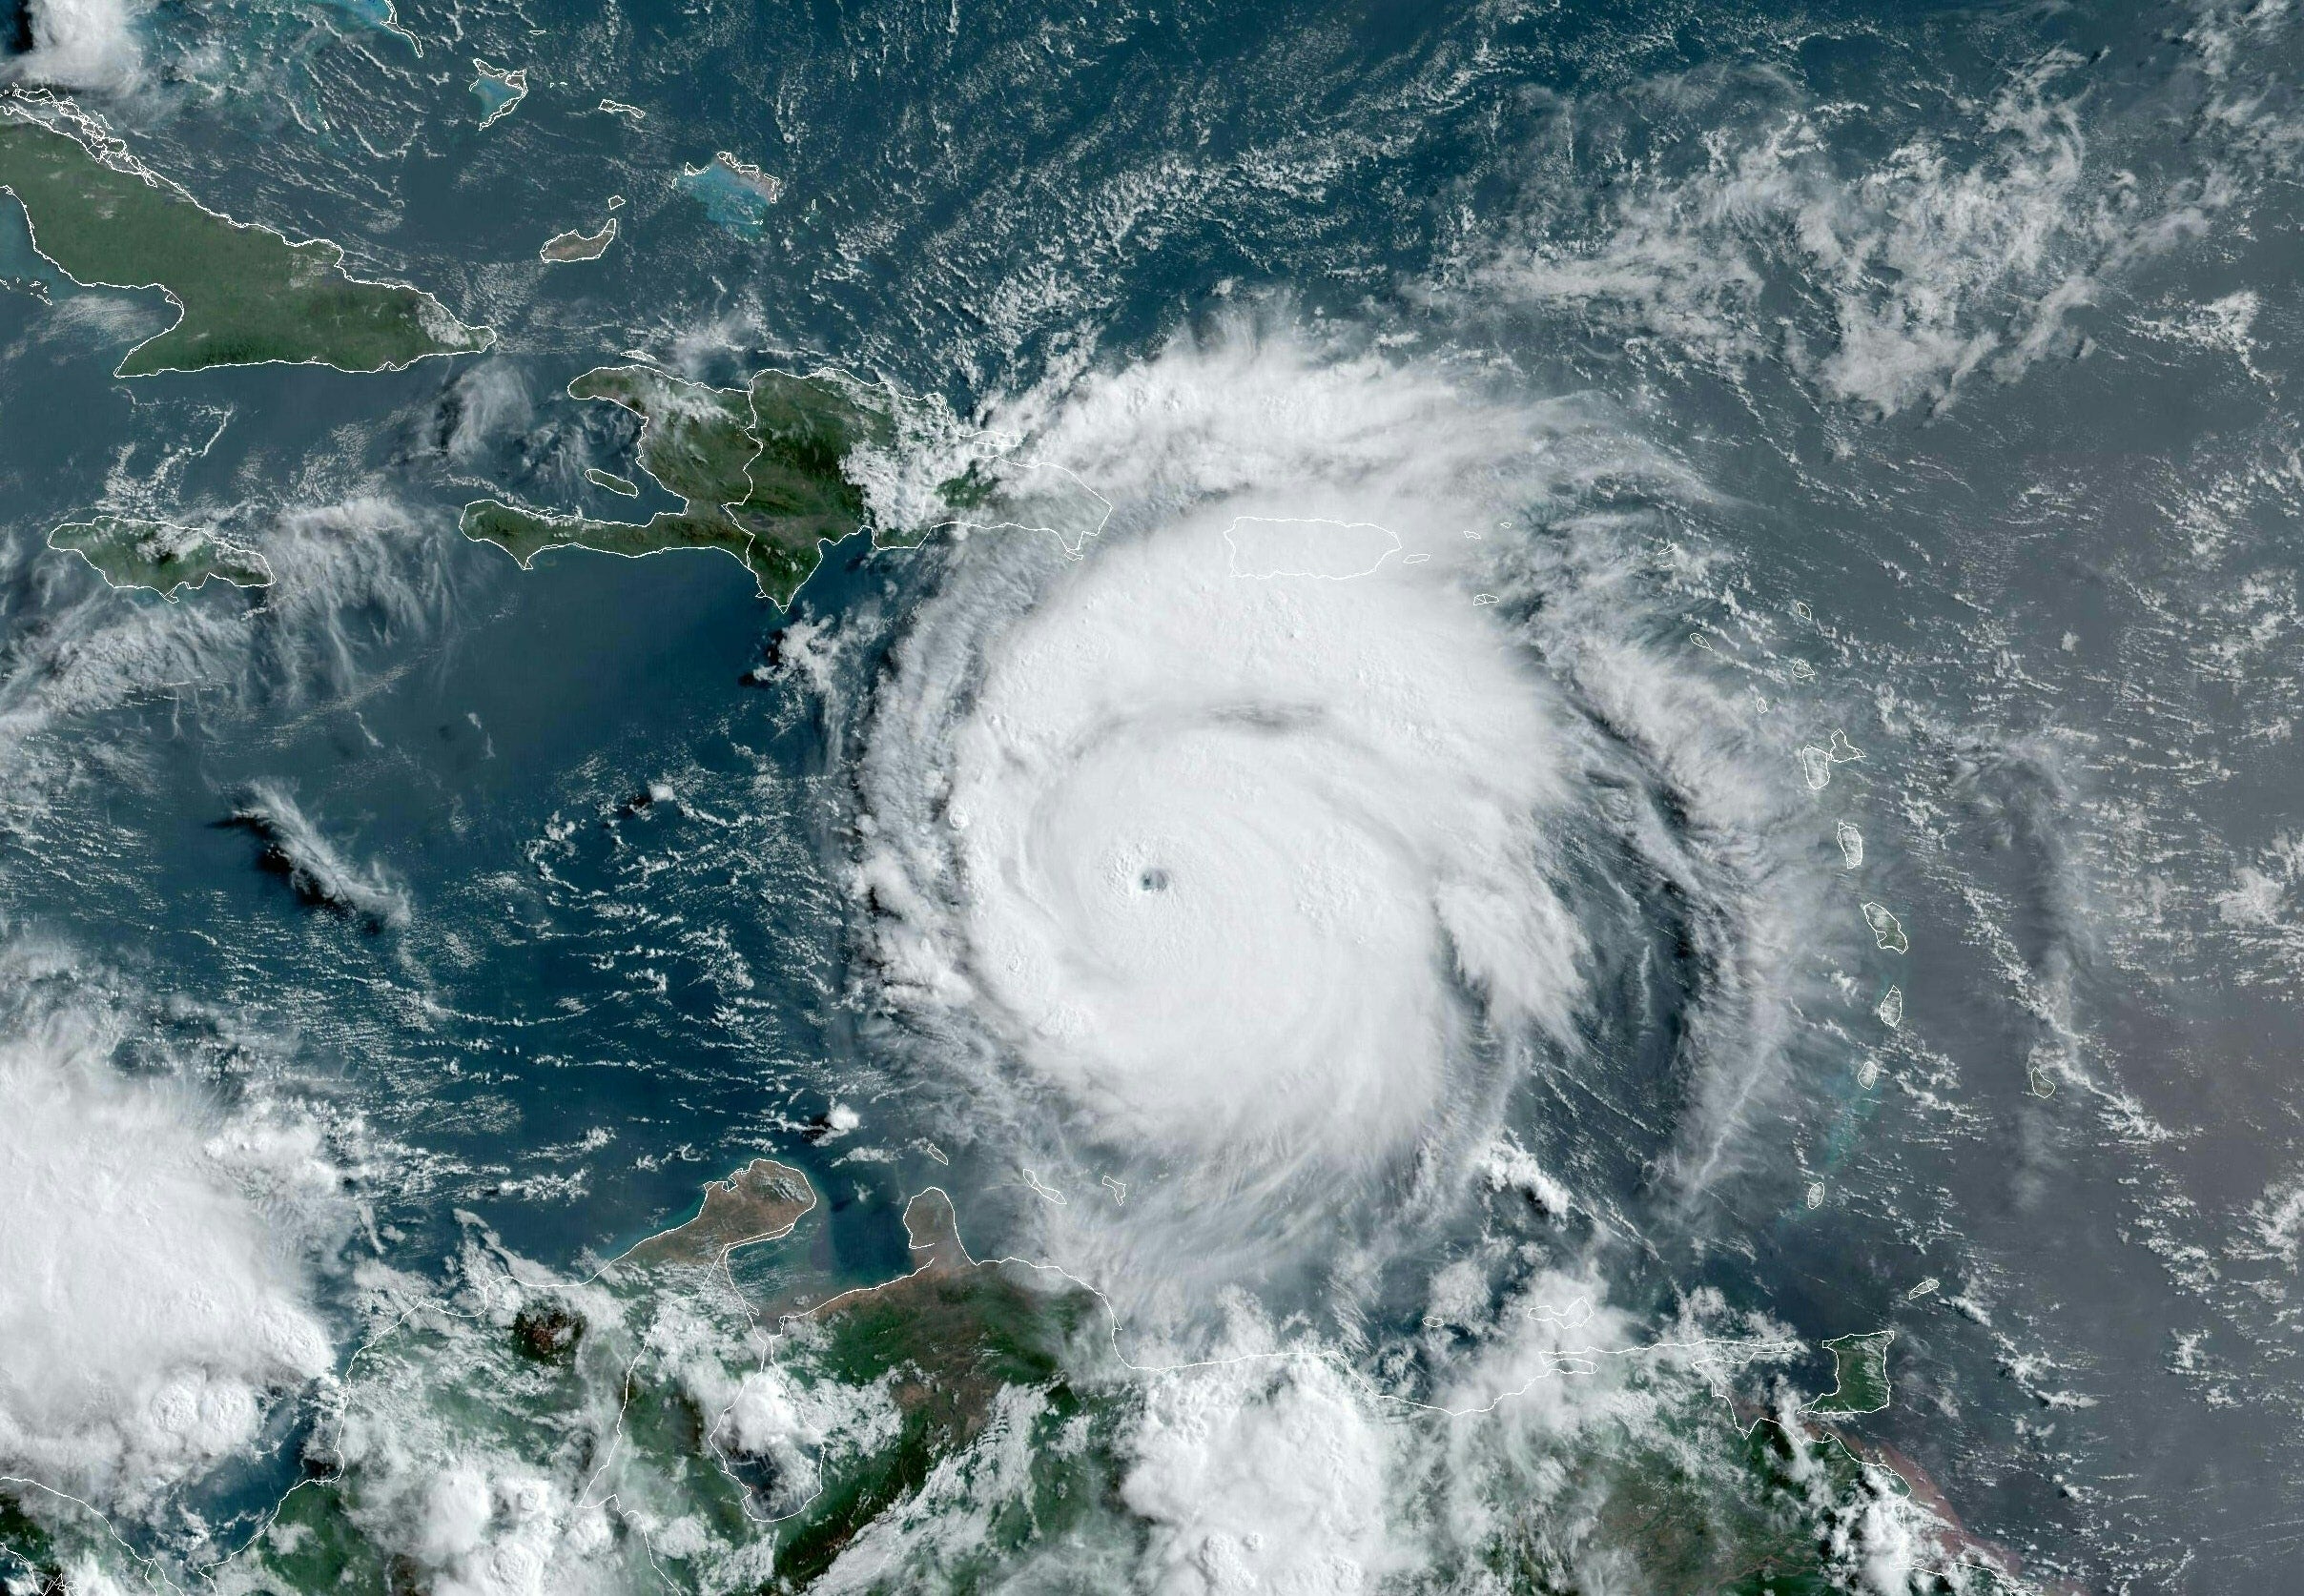 Satellite image from the National Oceanic and Atmospheric Administration shows hurricane Beryl east of Jamaica